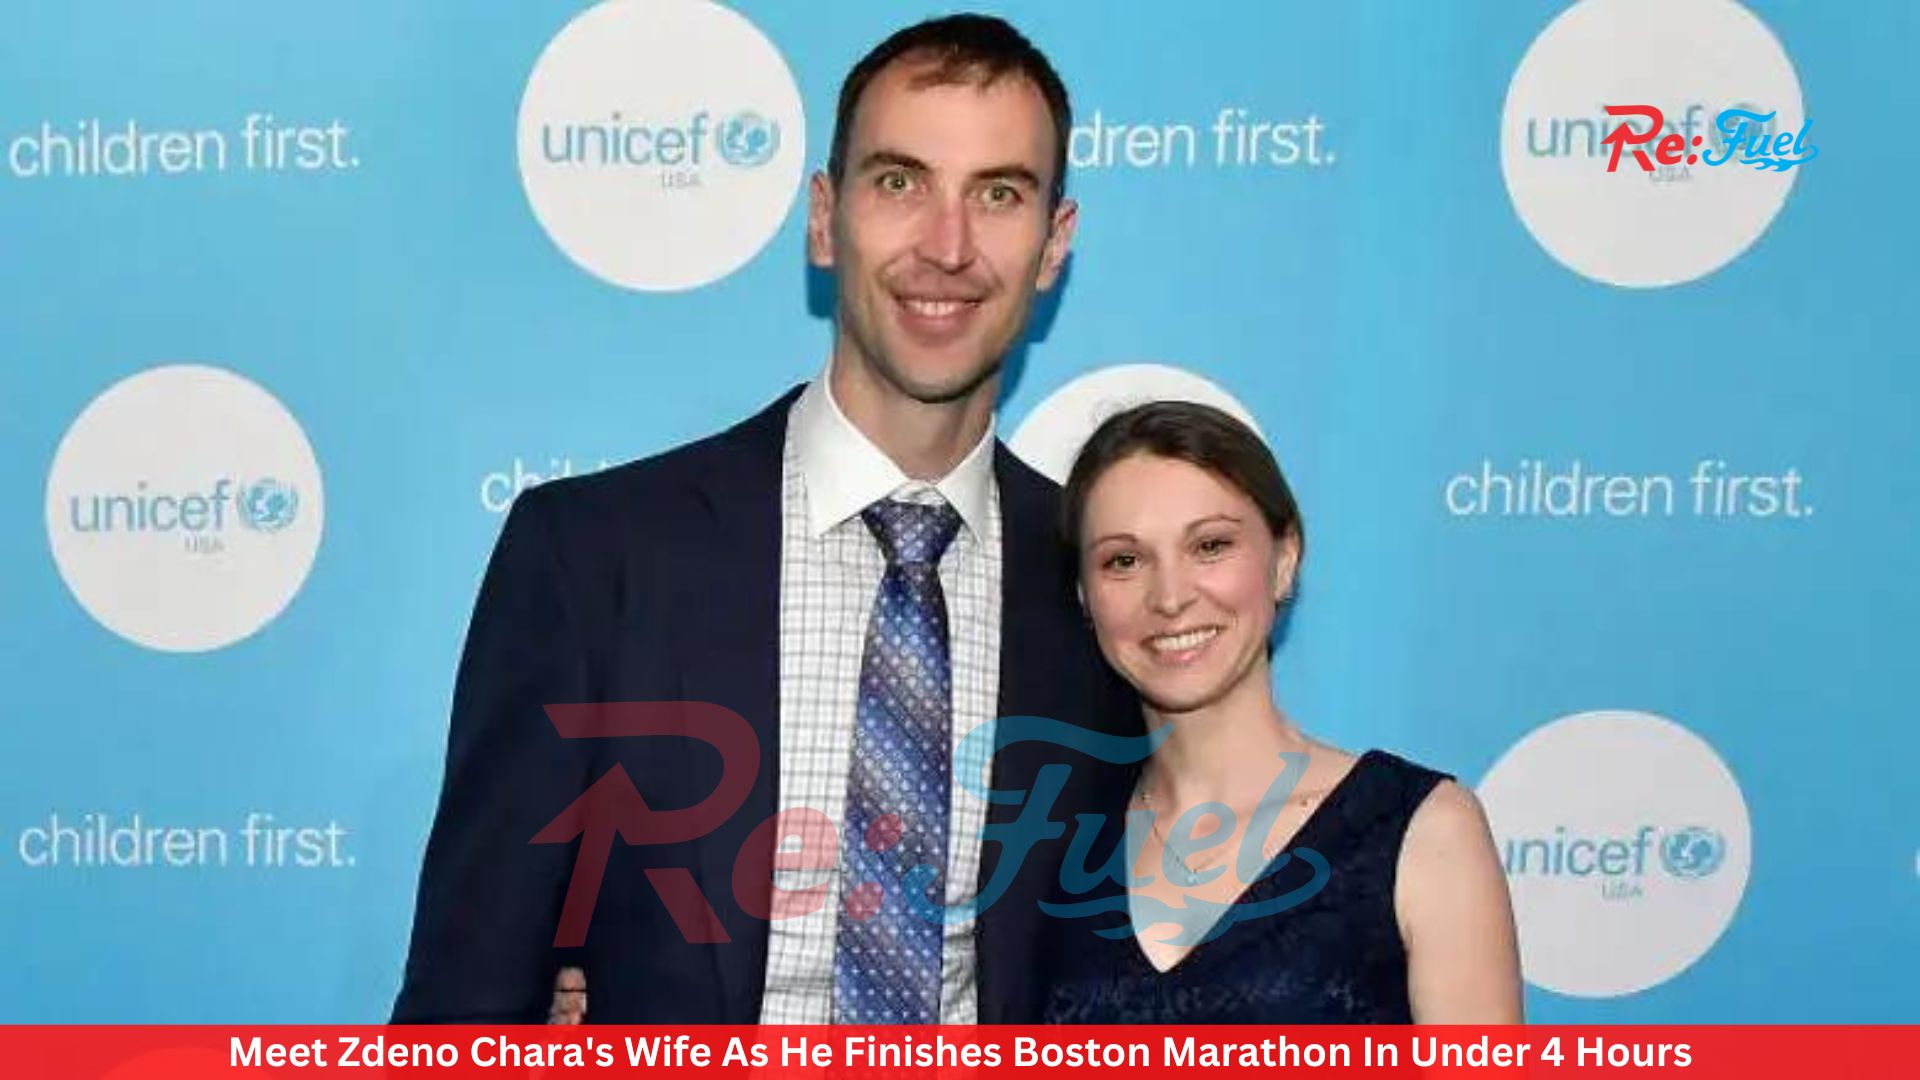 Meet Zdeno Chara's Wife As He Finishes Boston Marathon In Under 4 Hours